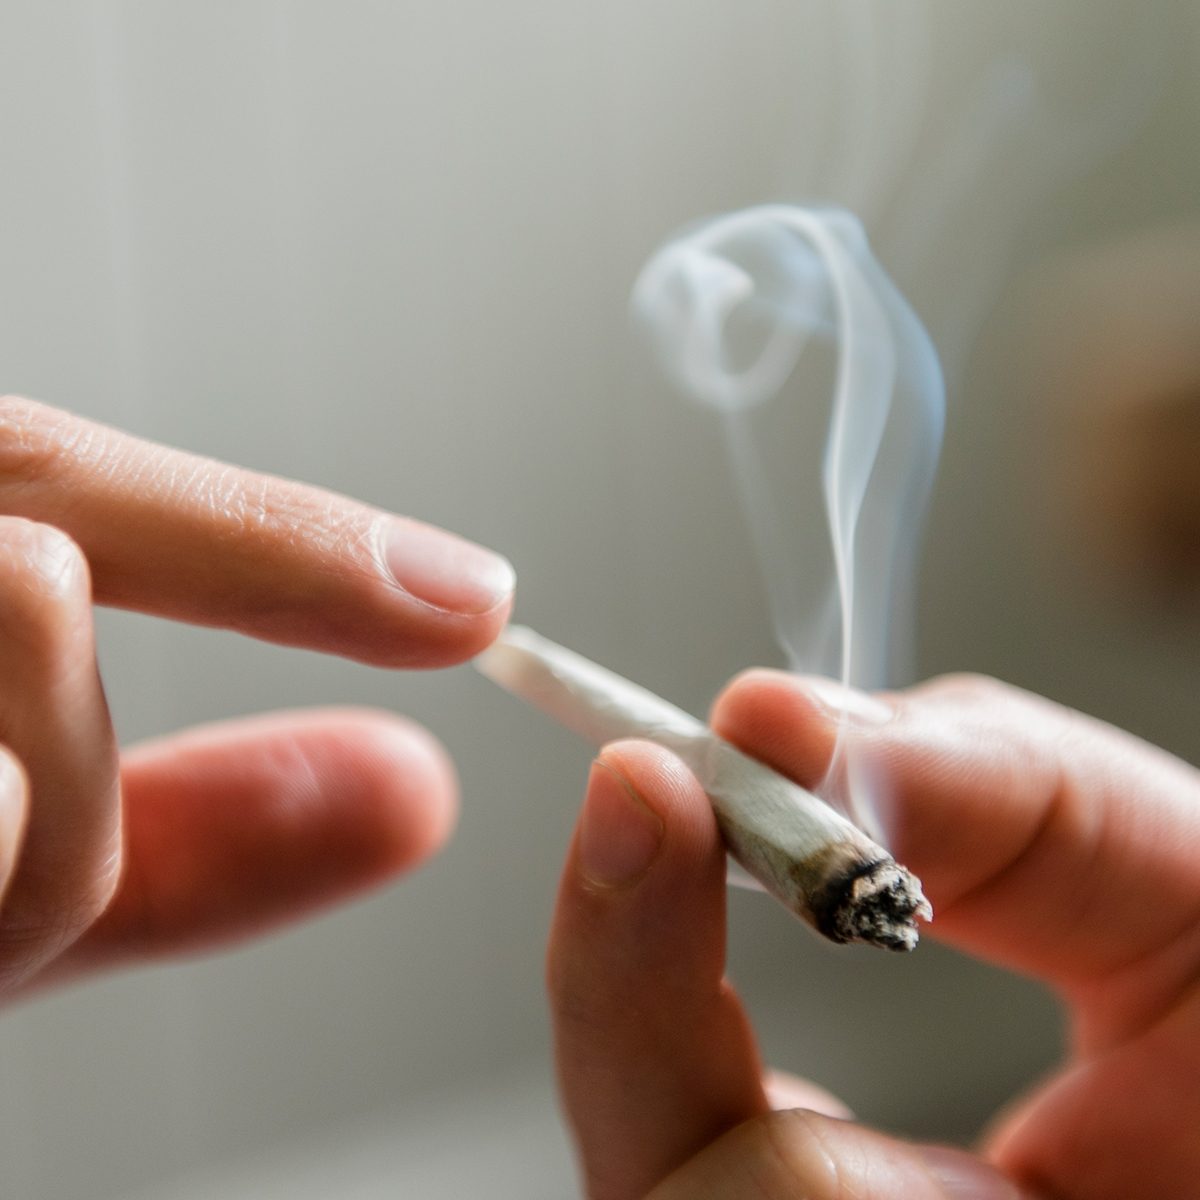 Does Smoking Weed Cause Lung Cancer? A Lung Cancer Doctor Shares "the Short Answer"